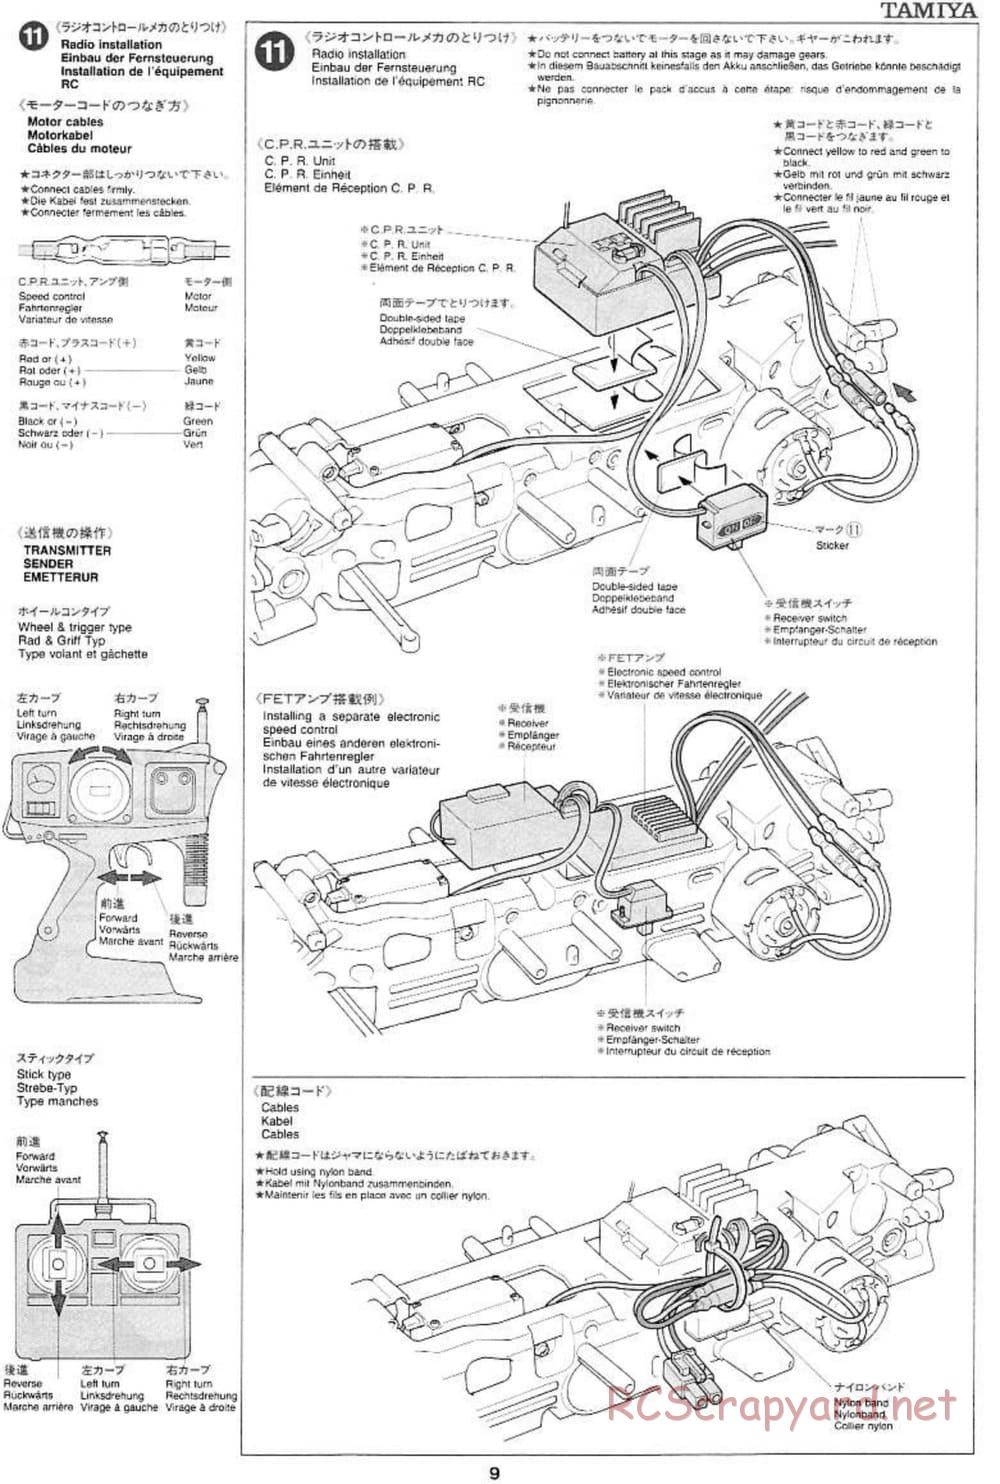 Tamiya - Pennzoil Nismo GT-R - TL-01 Chassis - Manual - Page 9